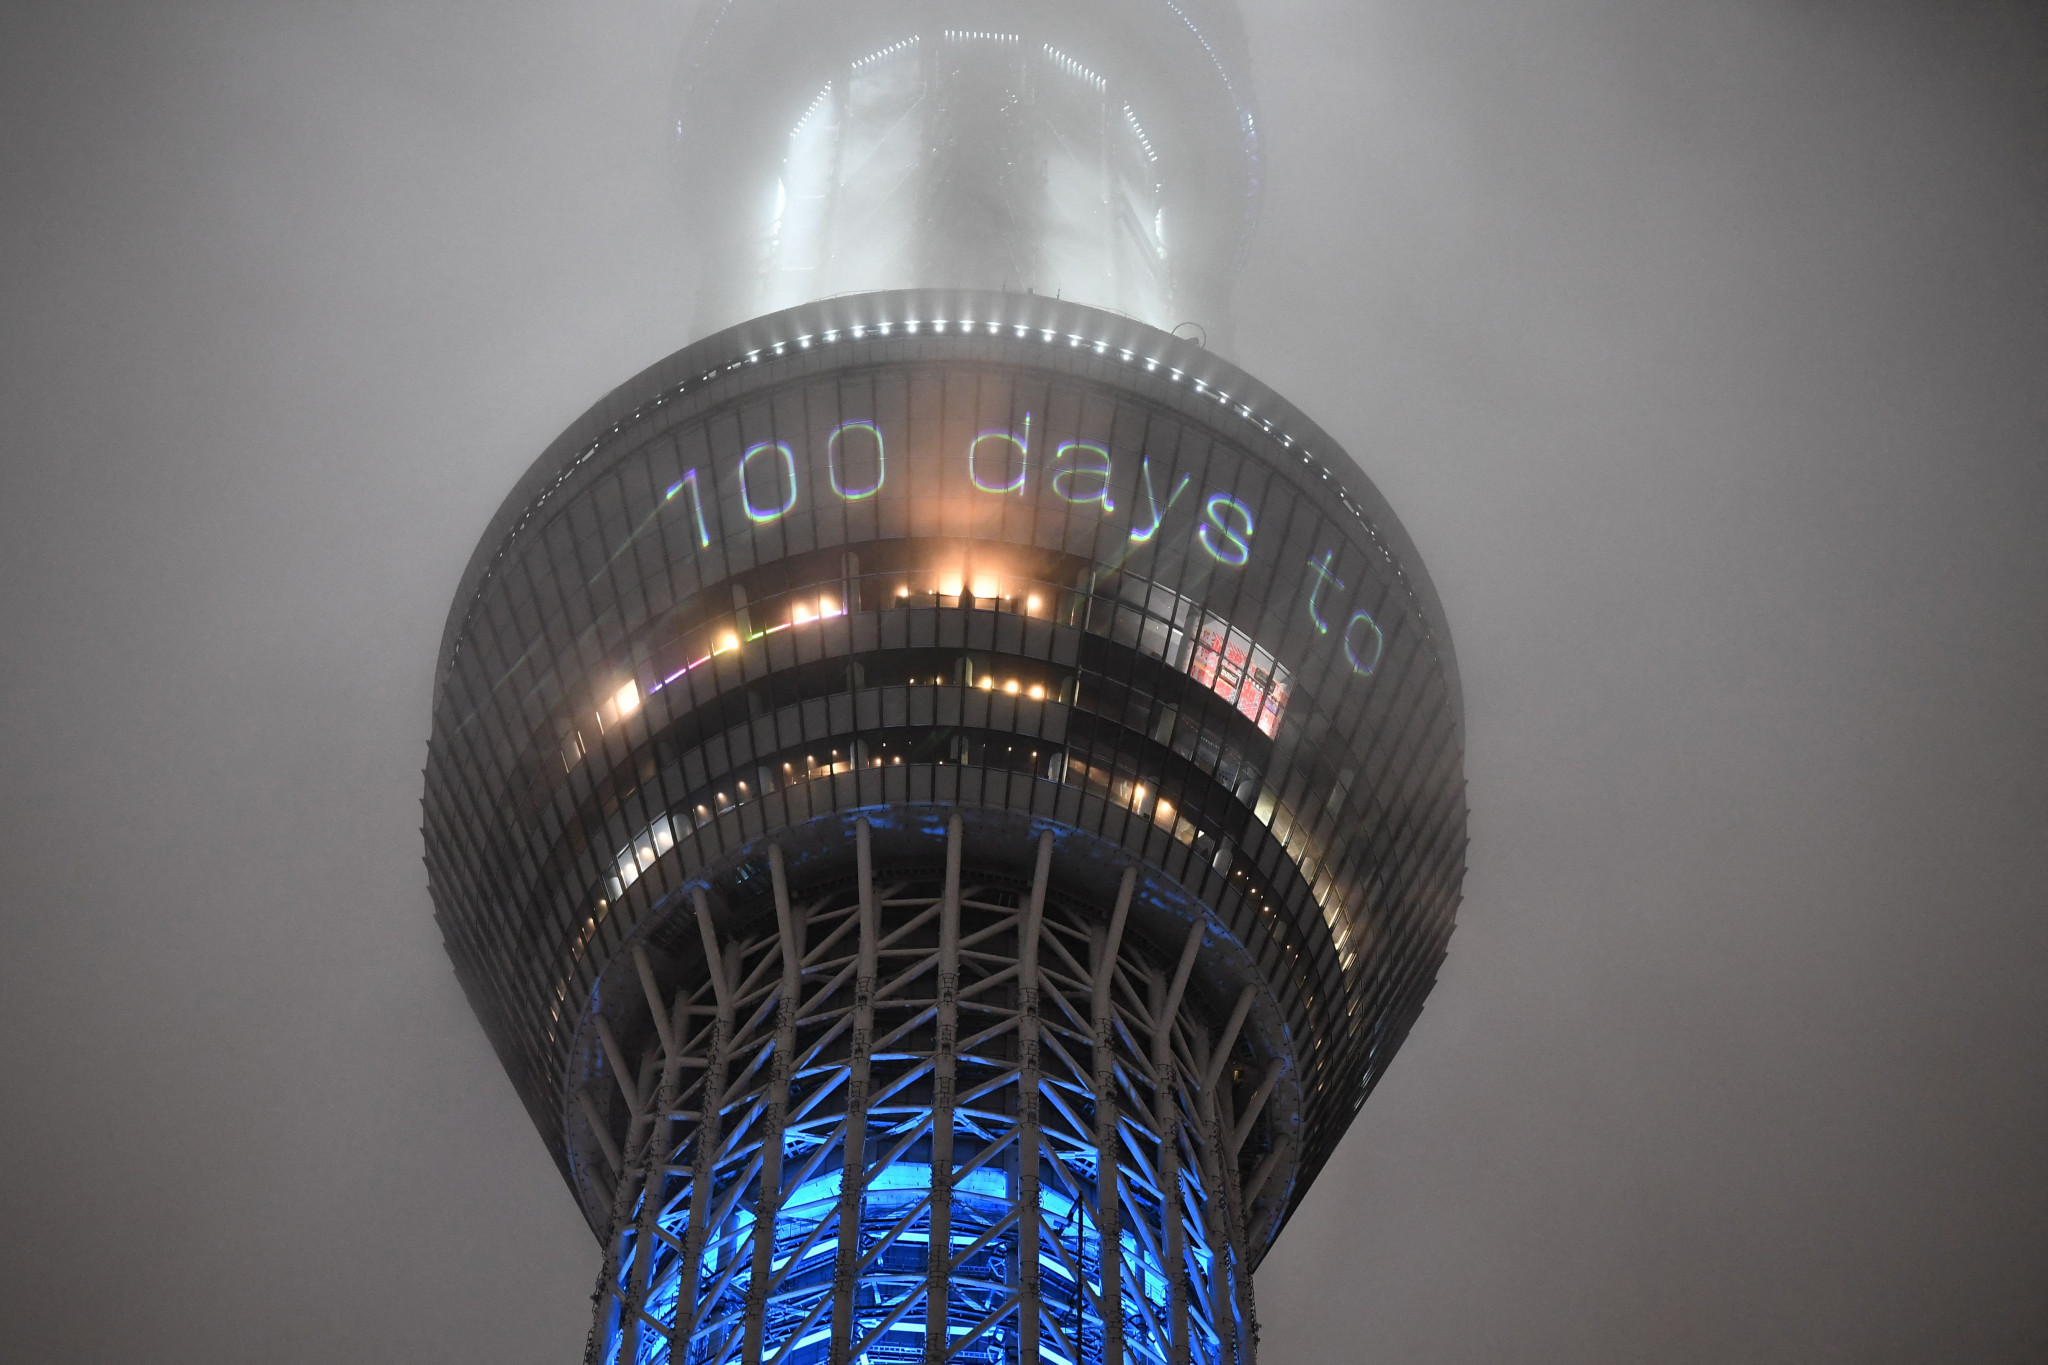 The 100 days countdown until the start of the Tokyo 2020 Olympic Games has been displayed on the illuminated Tokyo Skytree ©Getty Images